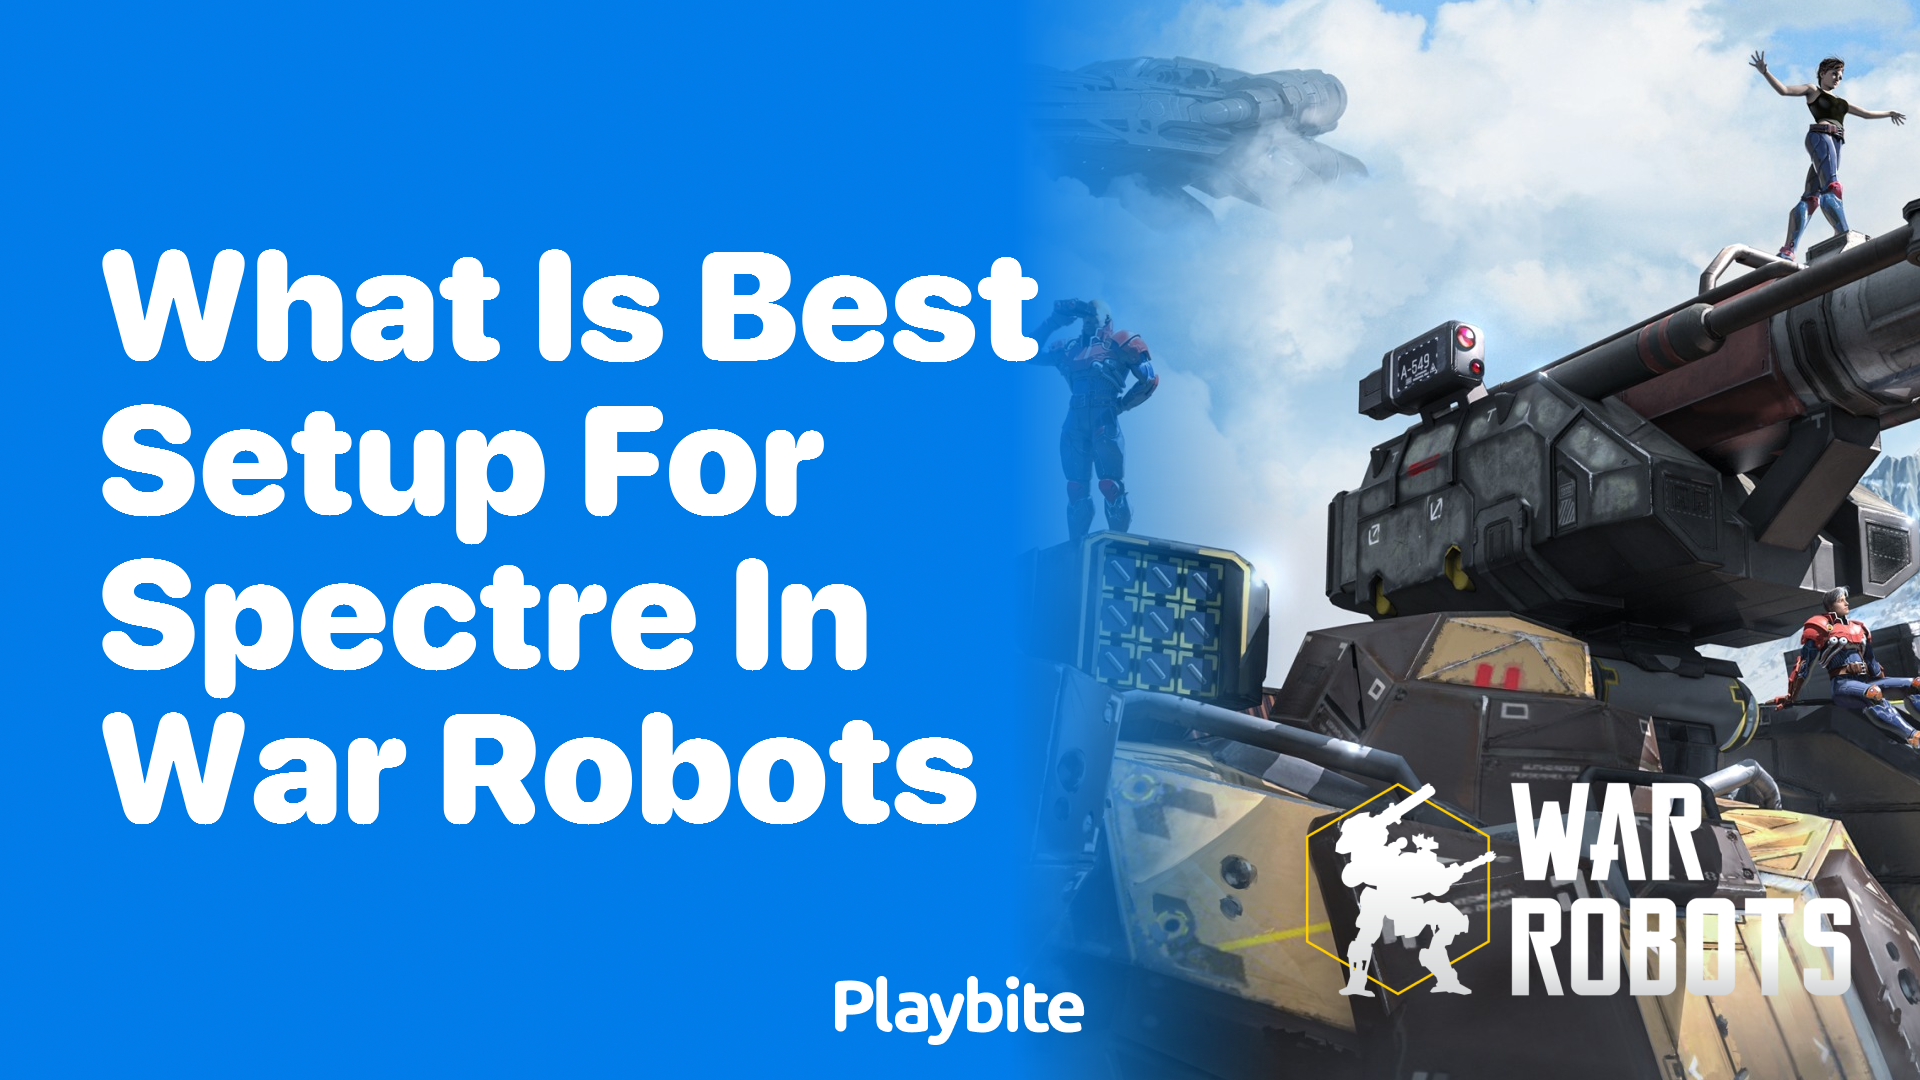 What Is the Best Setup for Spectre in War Robots?